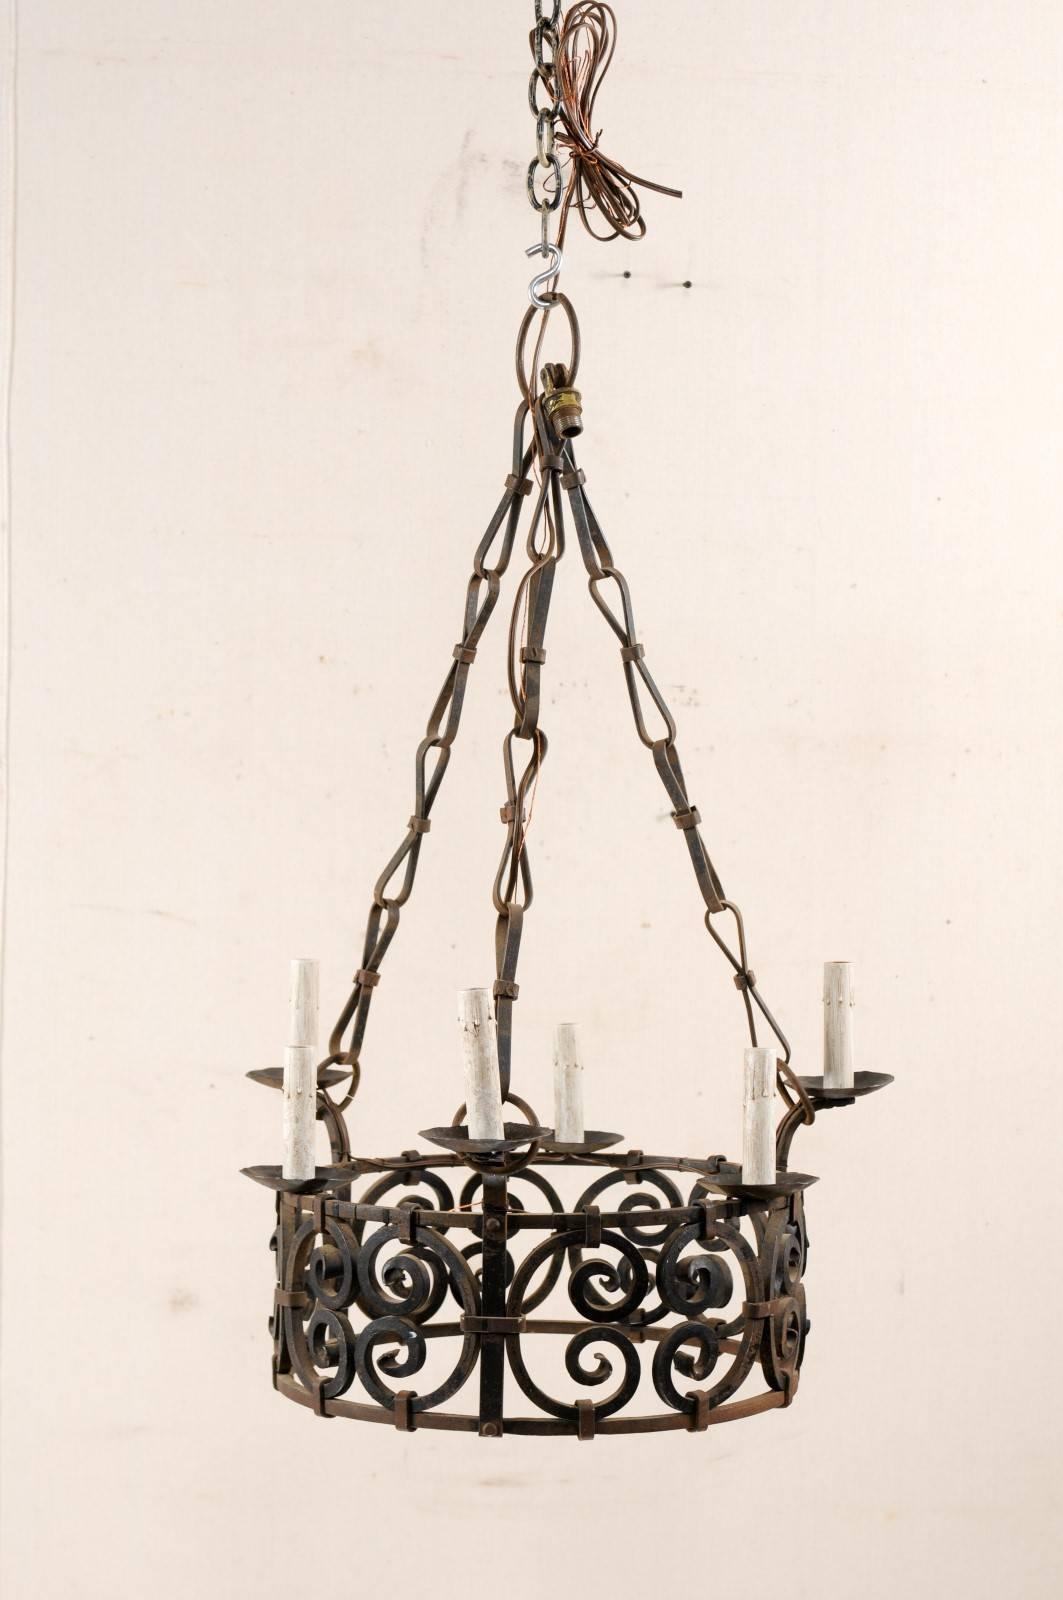 French 6-Light Ornate Iron Ring Chandelier in C-Scroll Motif & Bow Linked Chains For Sale 3